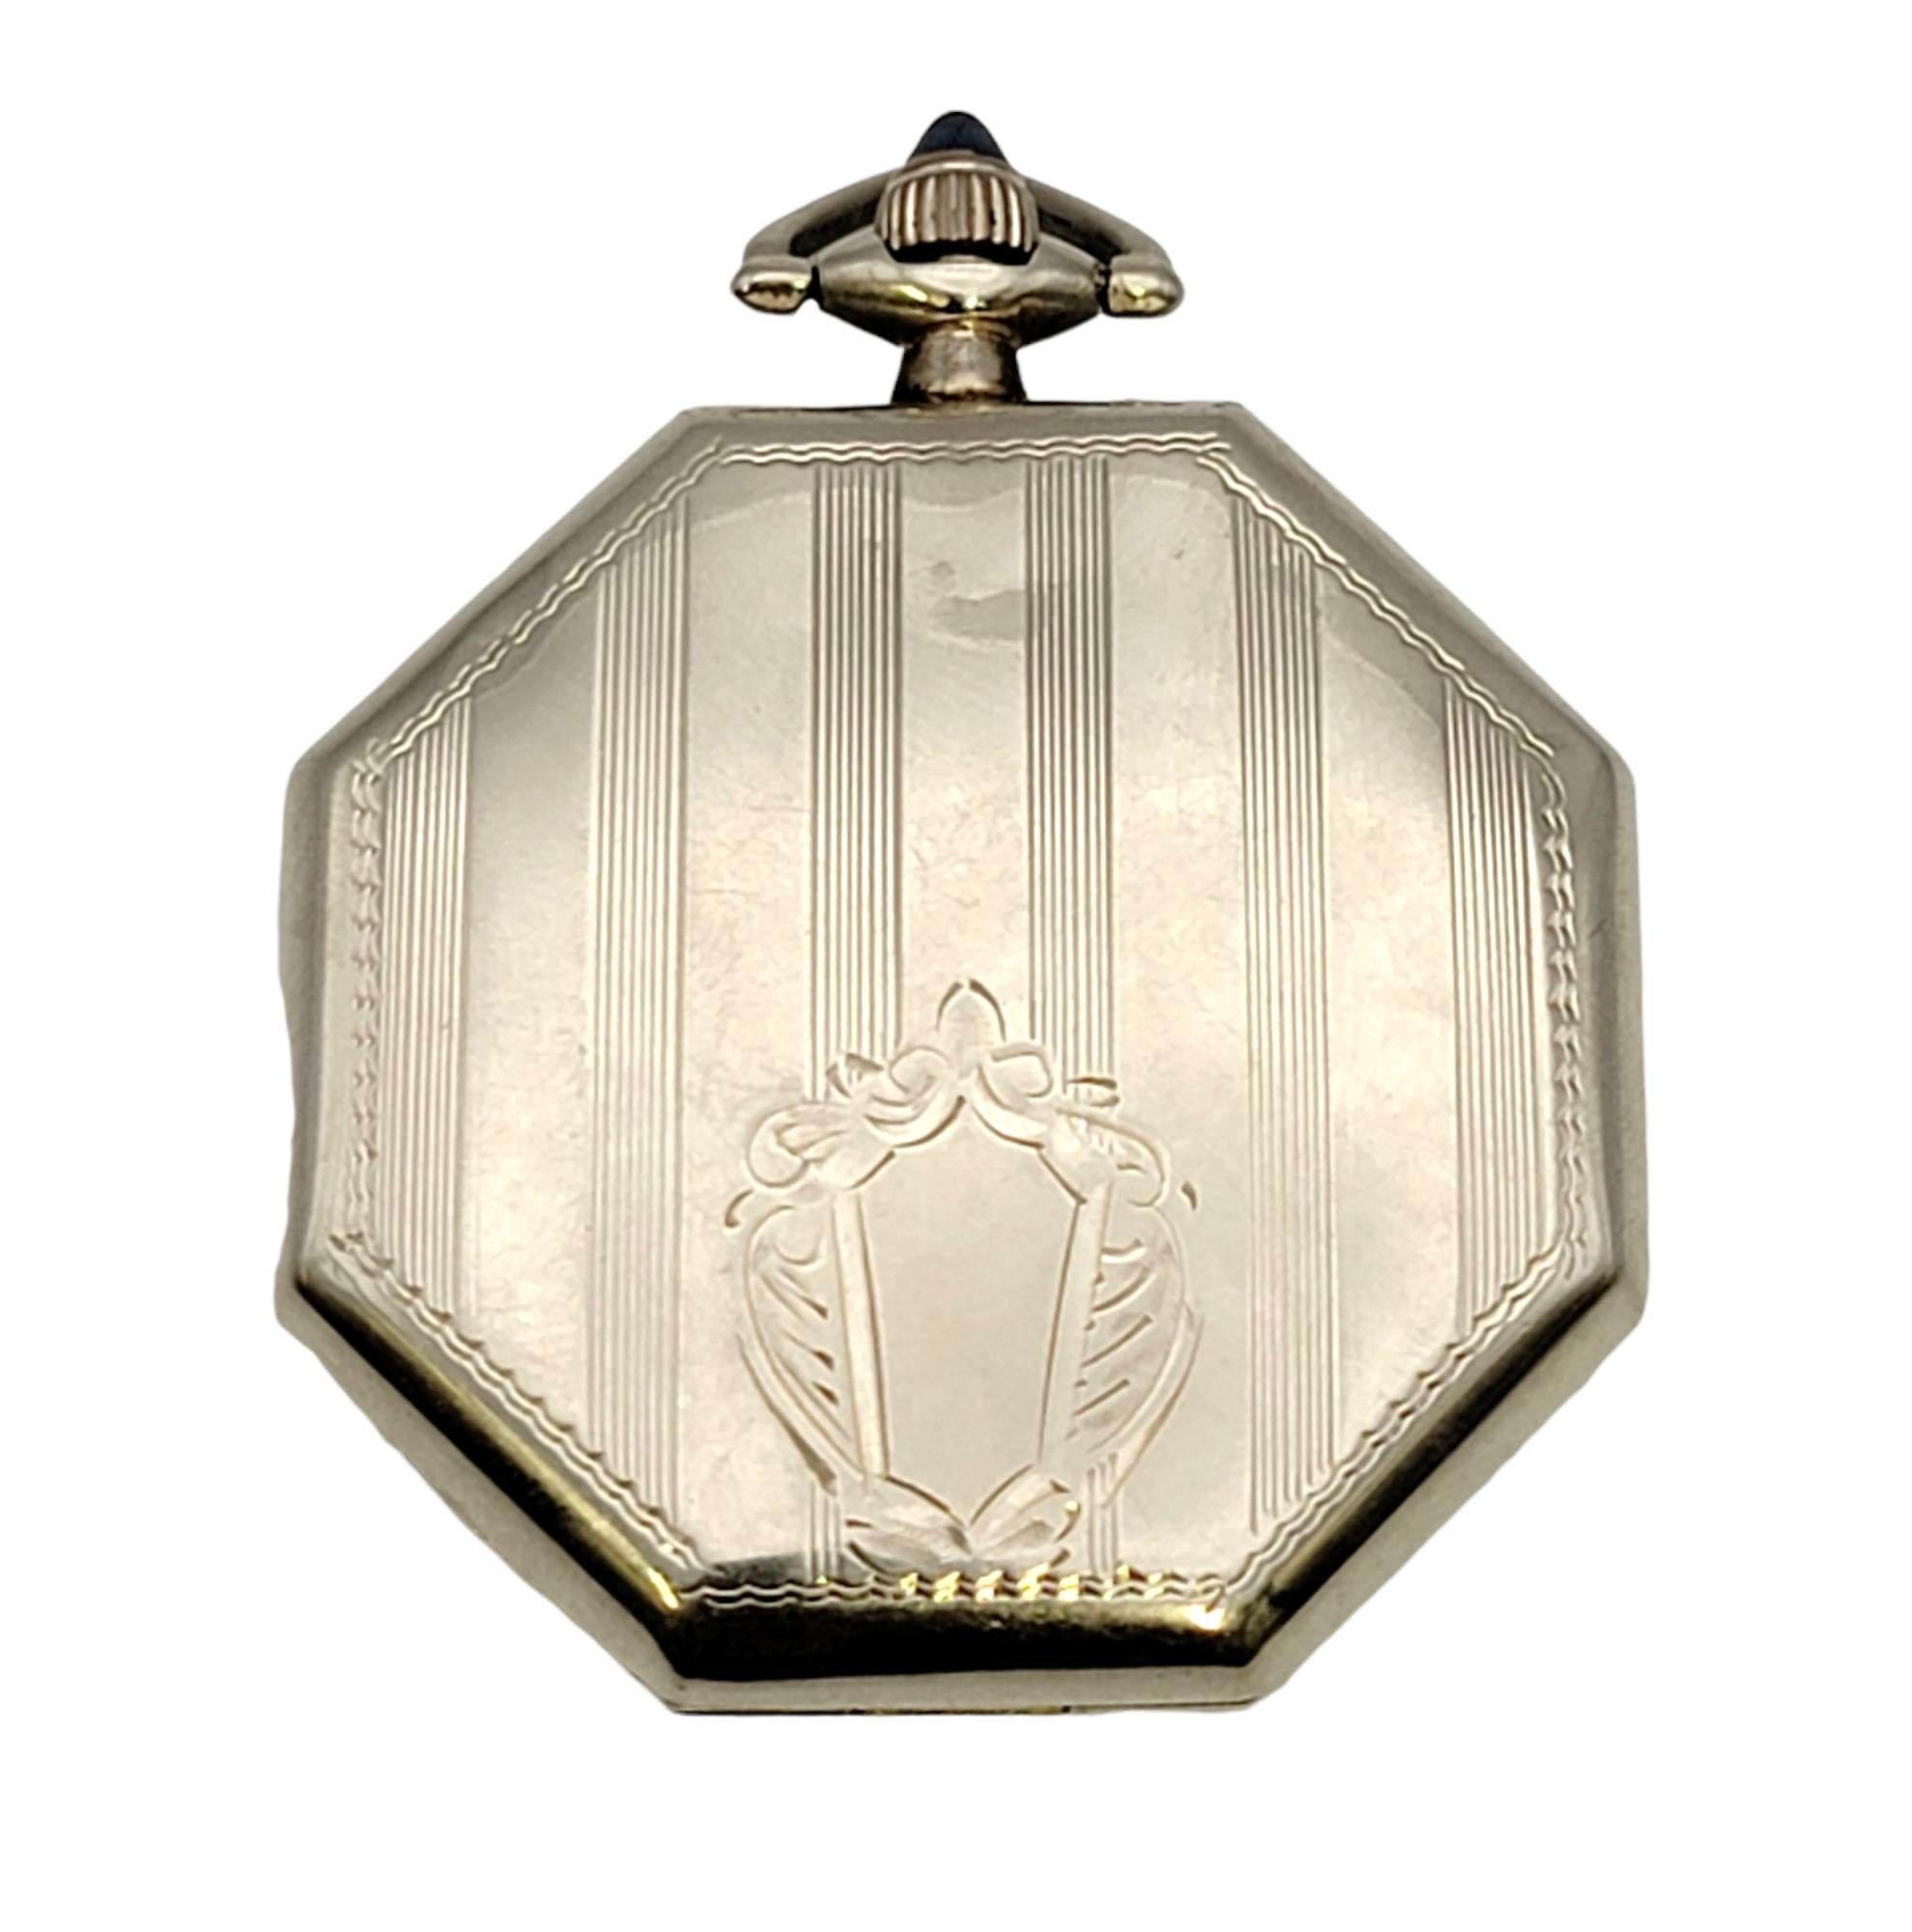 This stunning vintage 14 karat white gold pocket watch by Elgin is a stunning piece of history. The luxury solid gold timepiece is made with exquisite fine details. It features a 40mm octagonal case with a round white dial and black Arabic hour